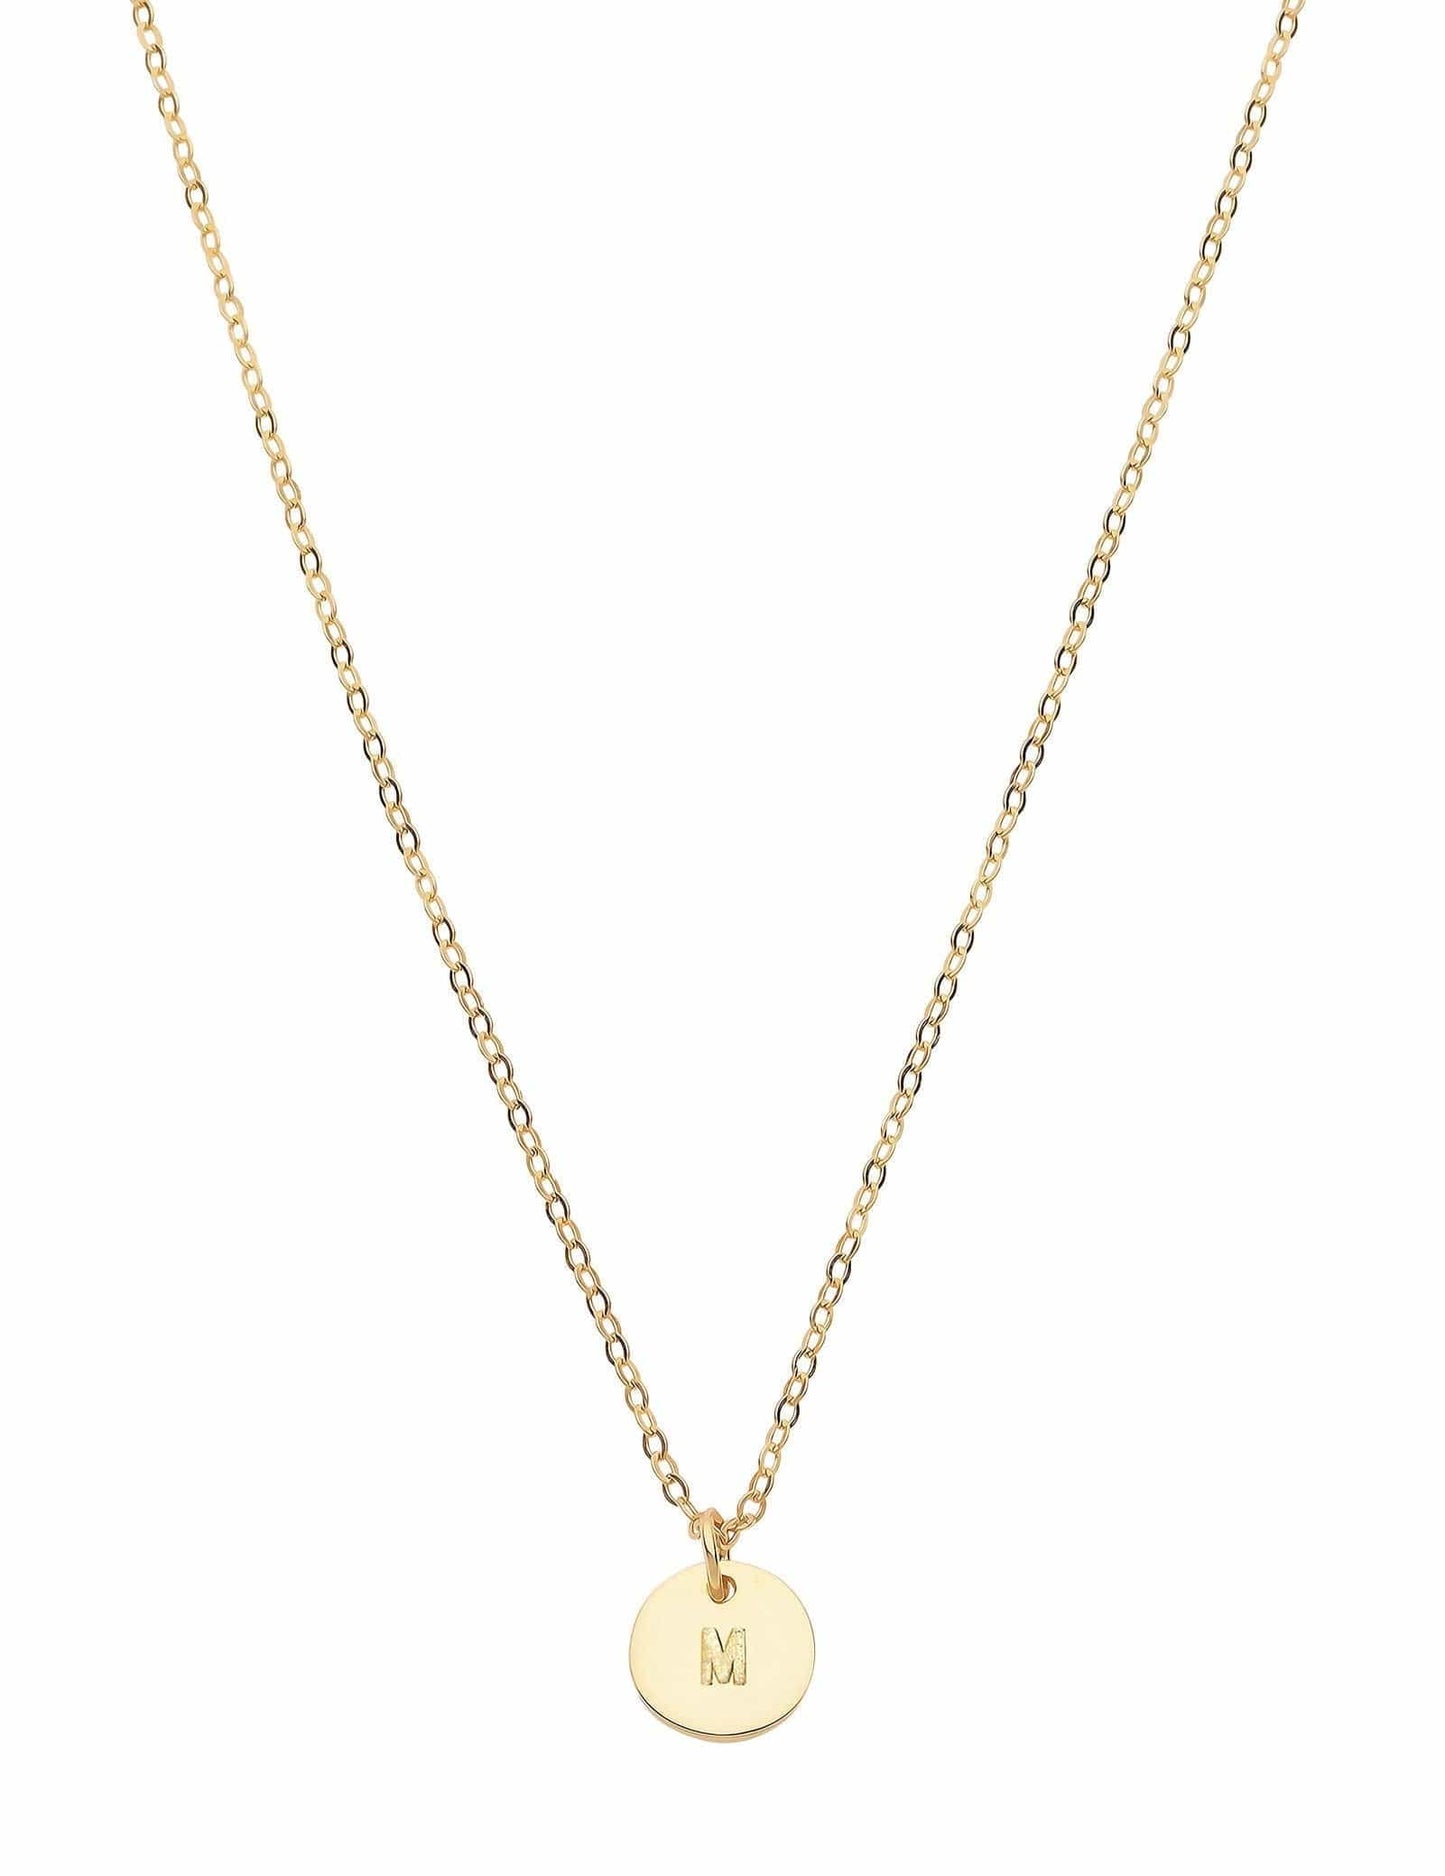 Dear Addison Yellow Gold Letter M Necklace